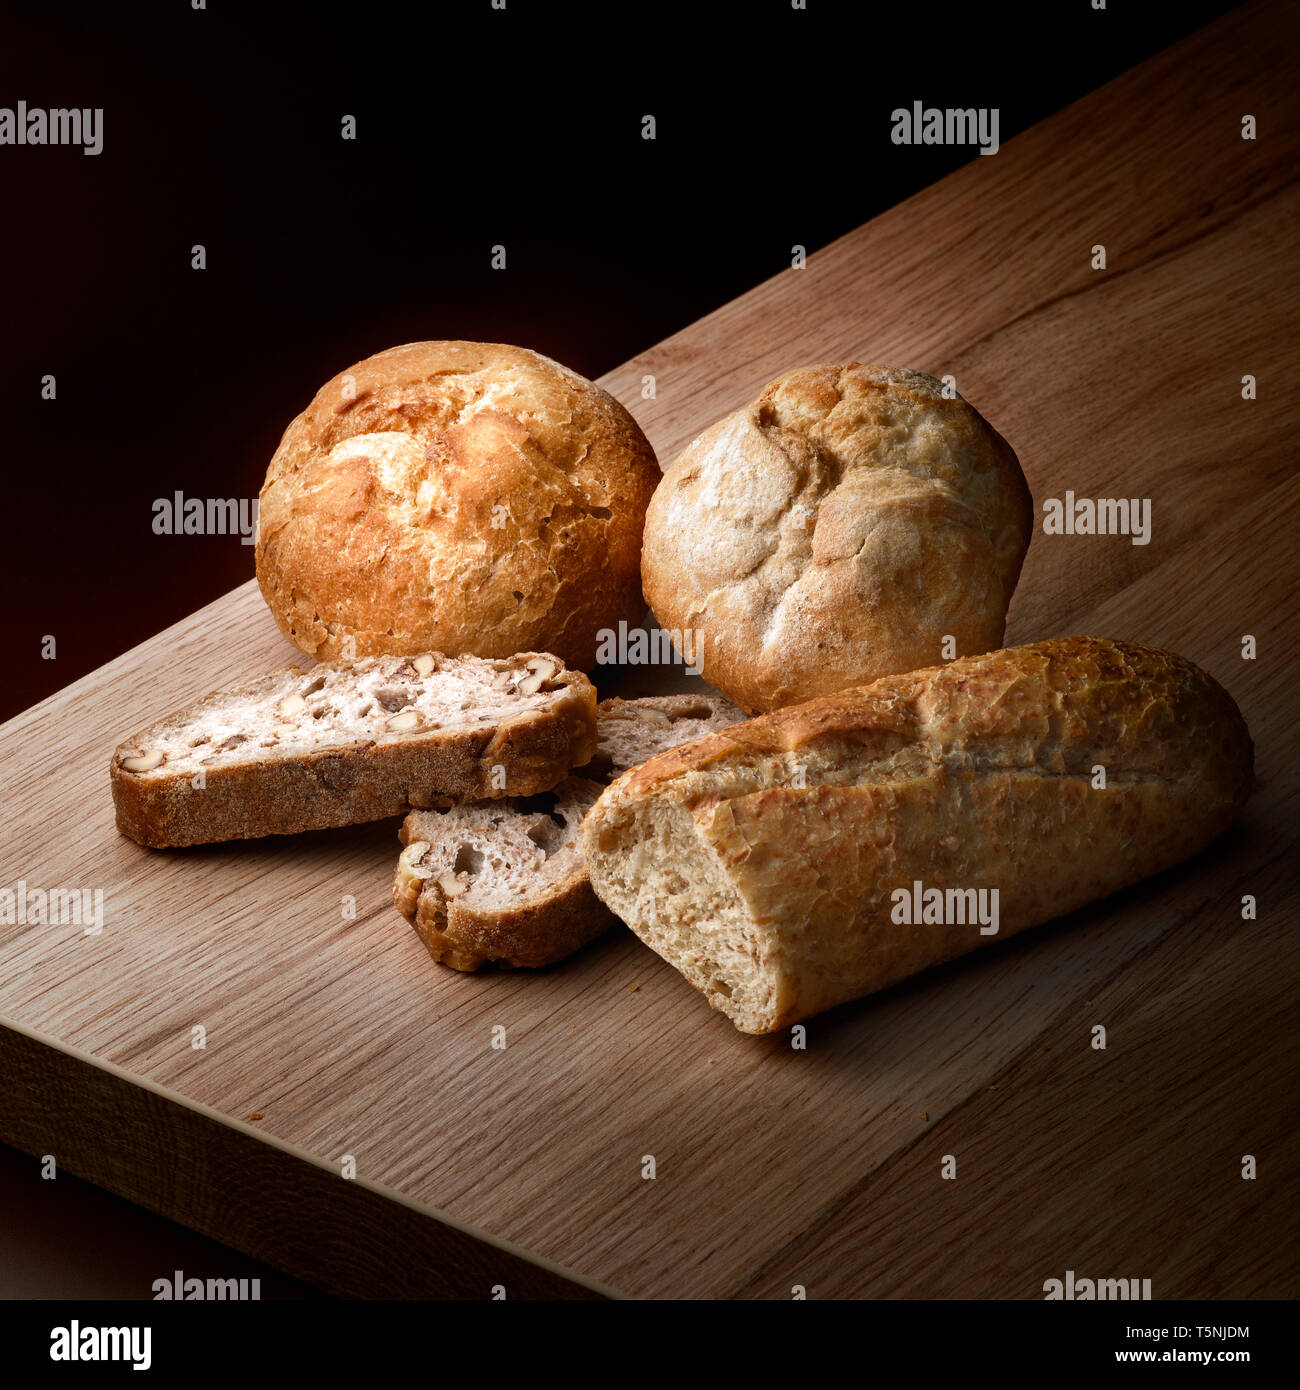 Arrangement of assortment of crunchy baked bread against wooden table in a dark ambiance Stock Photo